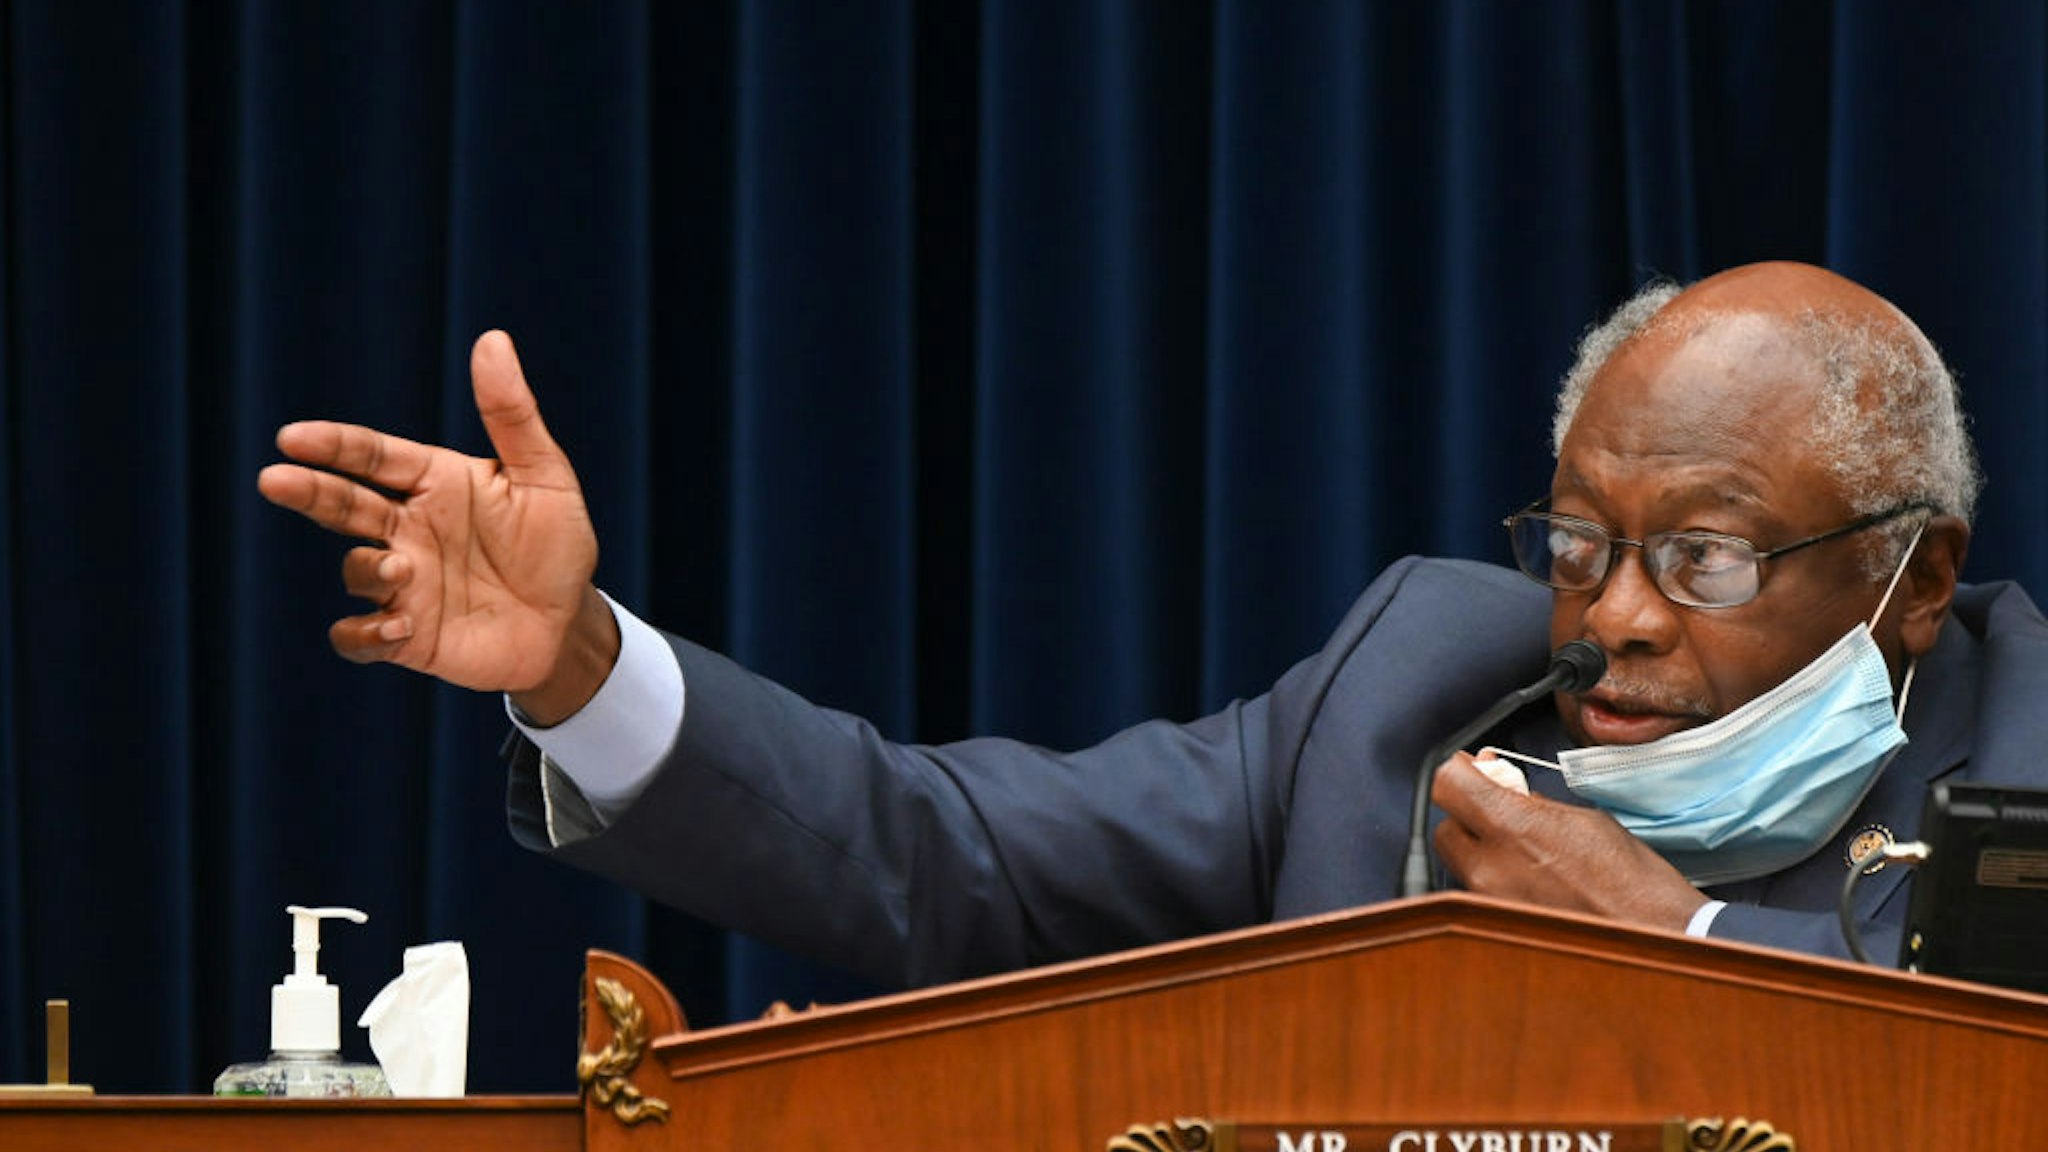 WASHINGTON, DC - JULY 31: Chairman of the House Select Subcommittee on the Coronavirus Crisis House Majority Whip James Clyburn (D-SC) speaks during a hearing on July 31, 2020 in Washington, DC. Trump administration officials are set to defend the federal government's response to the coronavirus crisis at the hearing hosted by a House panel calling for a national plan to contain the virus. (Photo by Erin Scott-Pool/Getty Images)